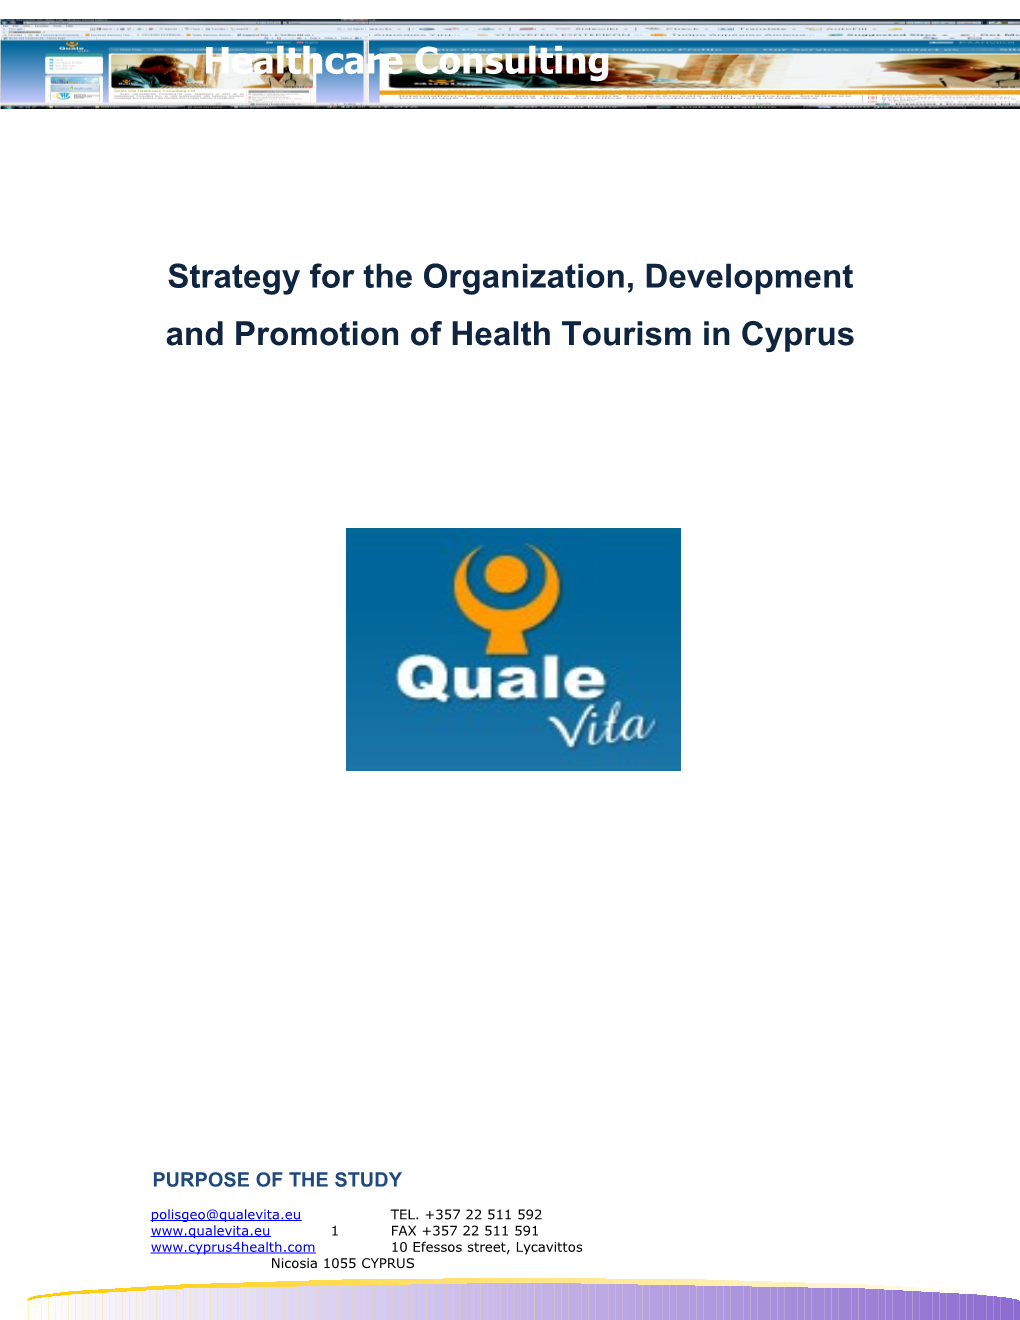 Strategy for the Organization, Development and Promotion of Health Tourism in Cyprus